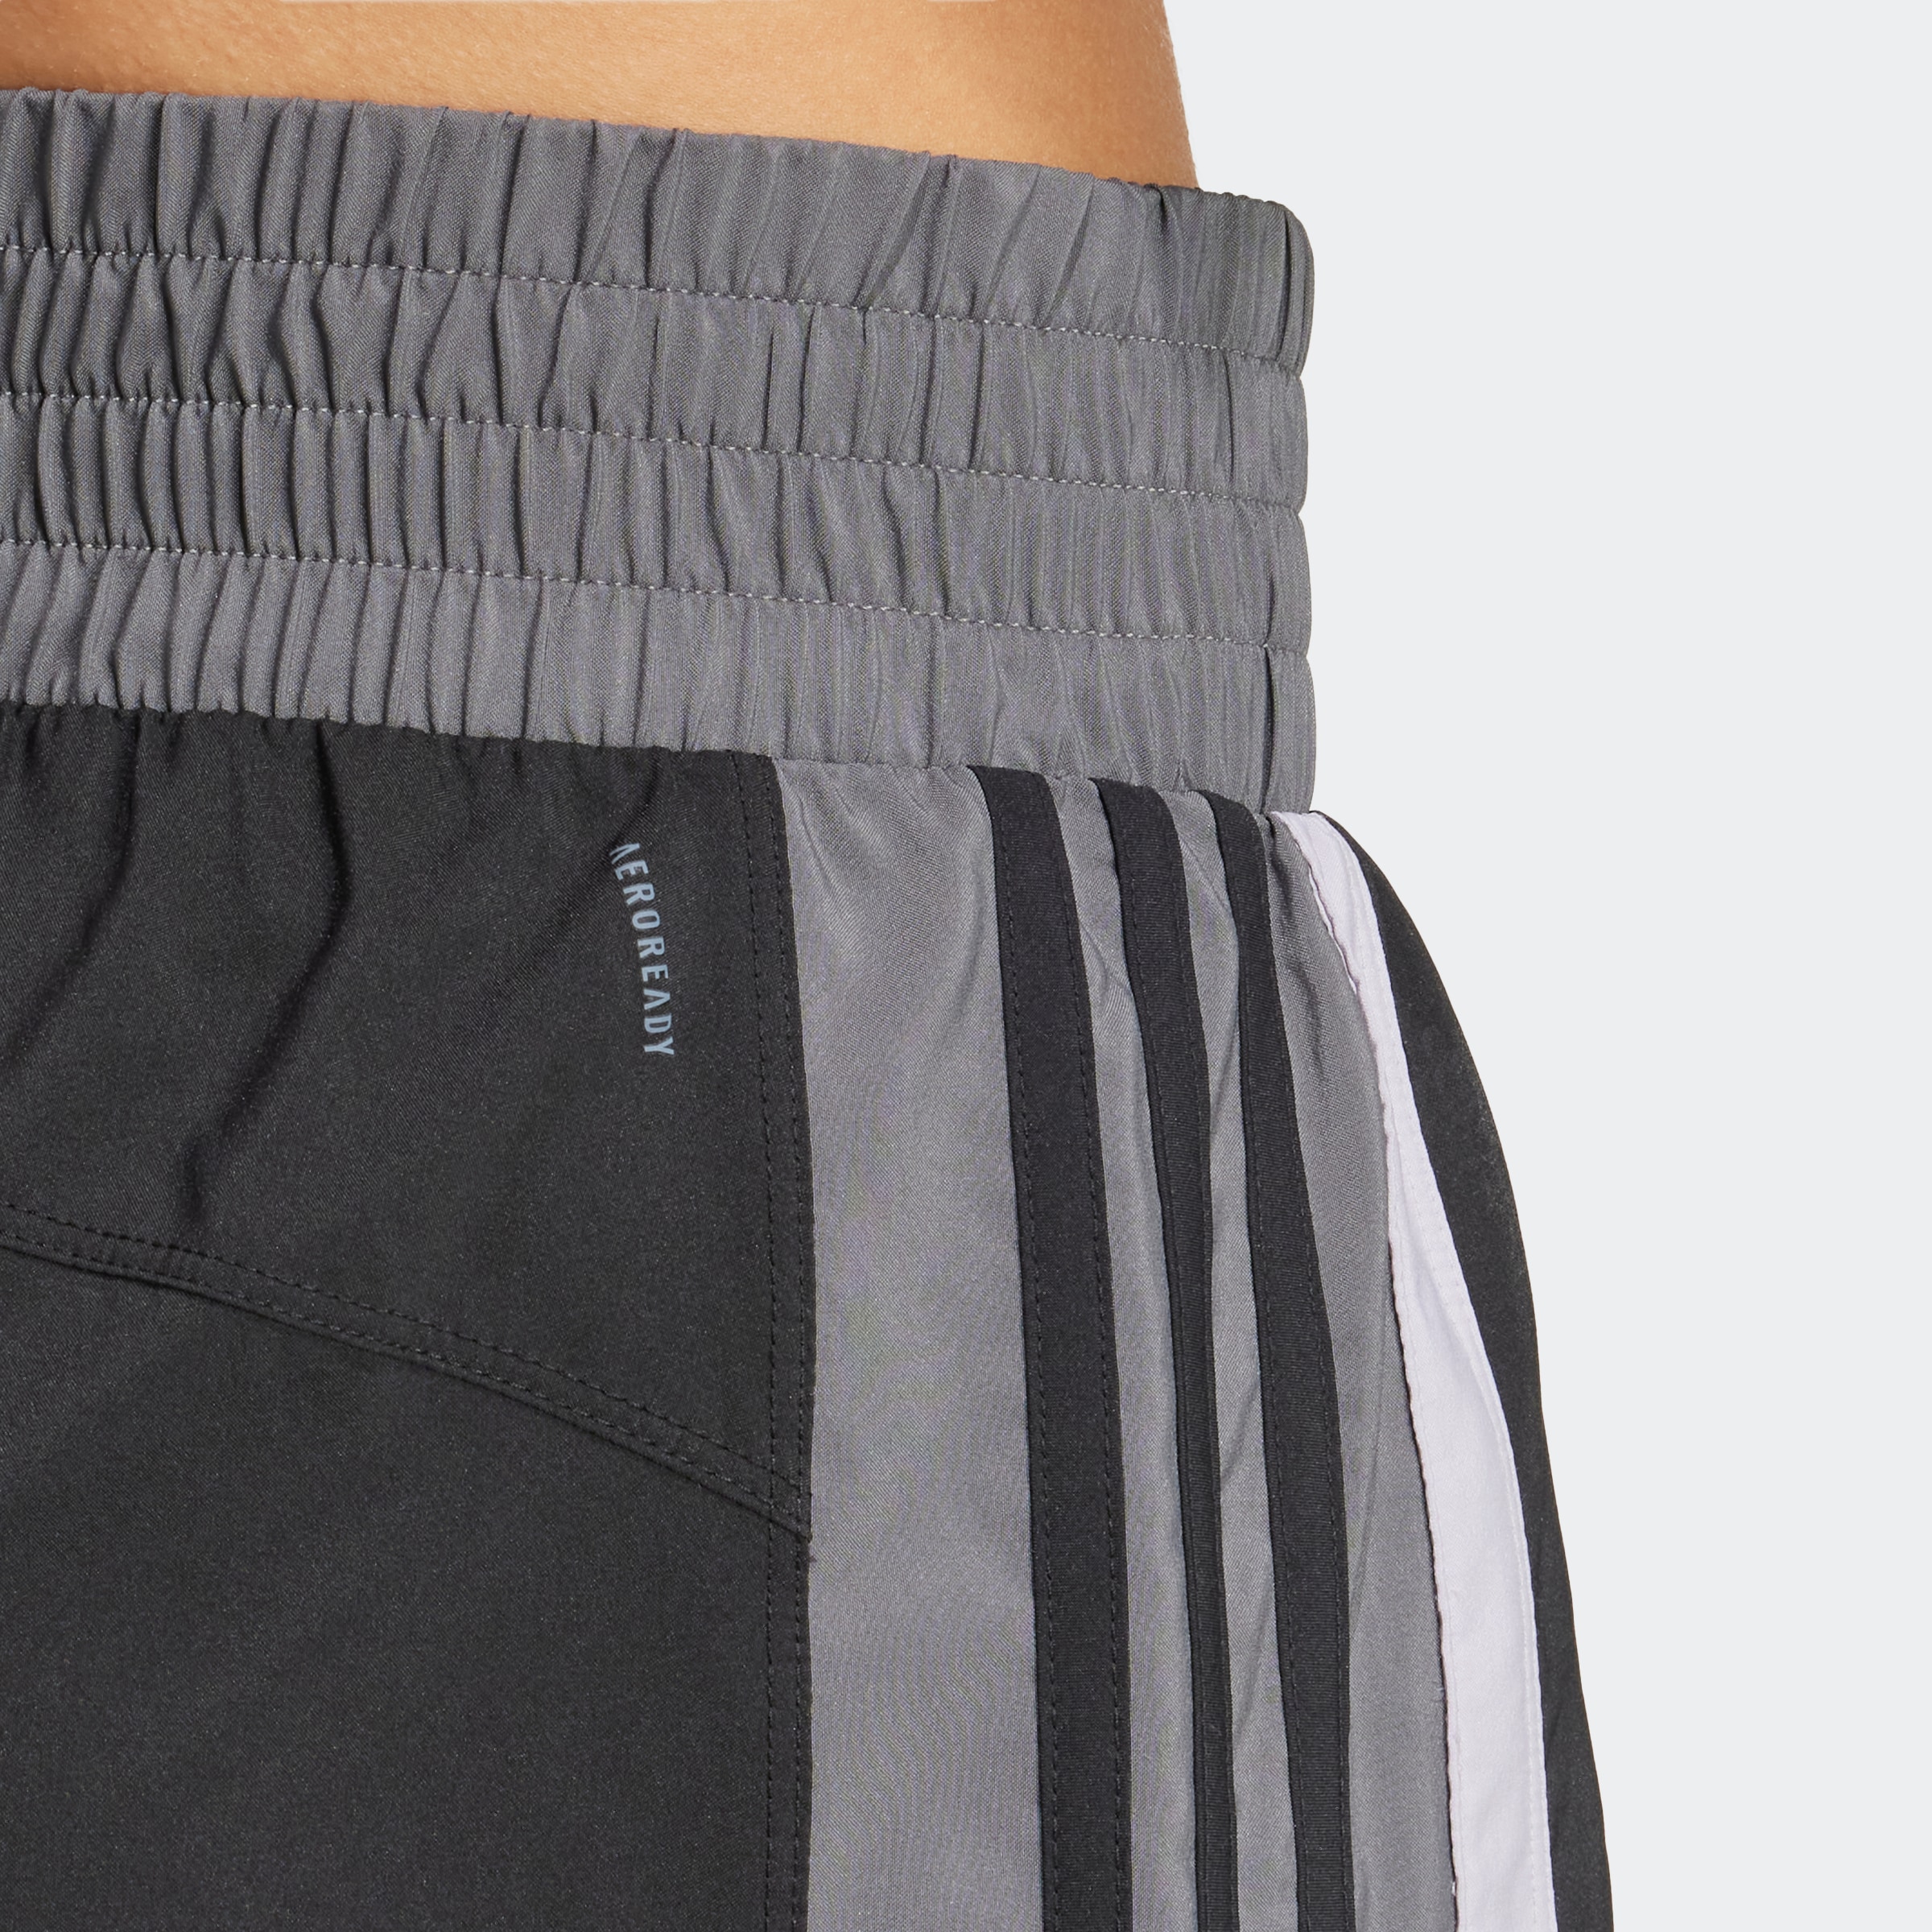 adidas Performance Shorts »PACER COLORBLCK«, (1 tlg.)